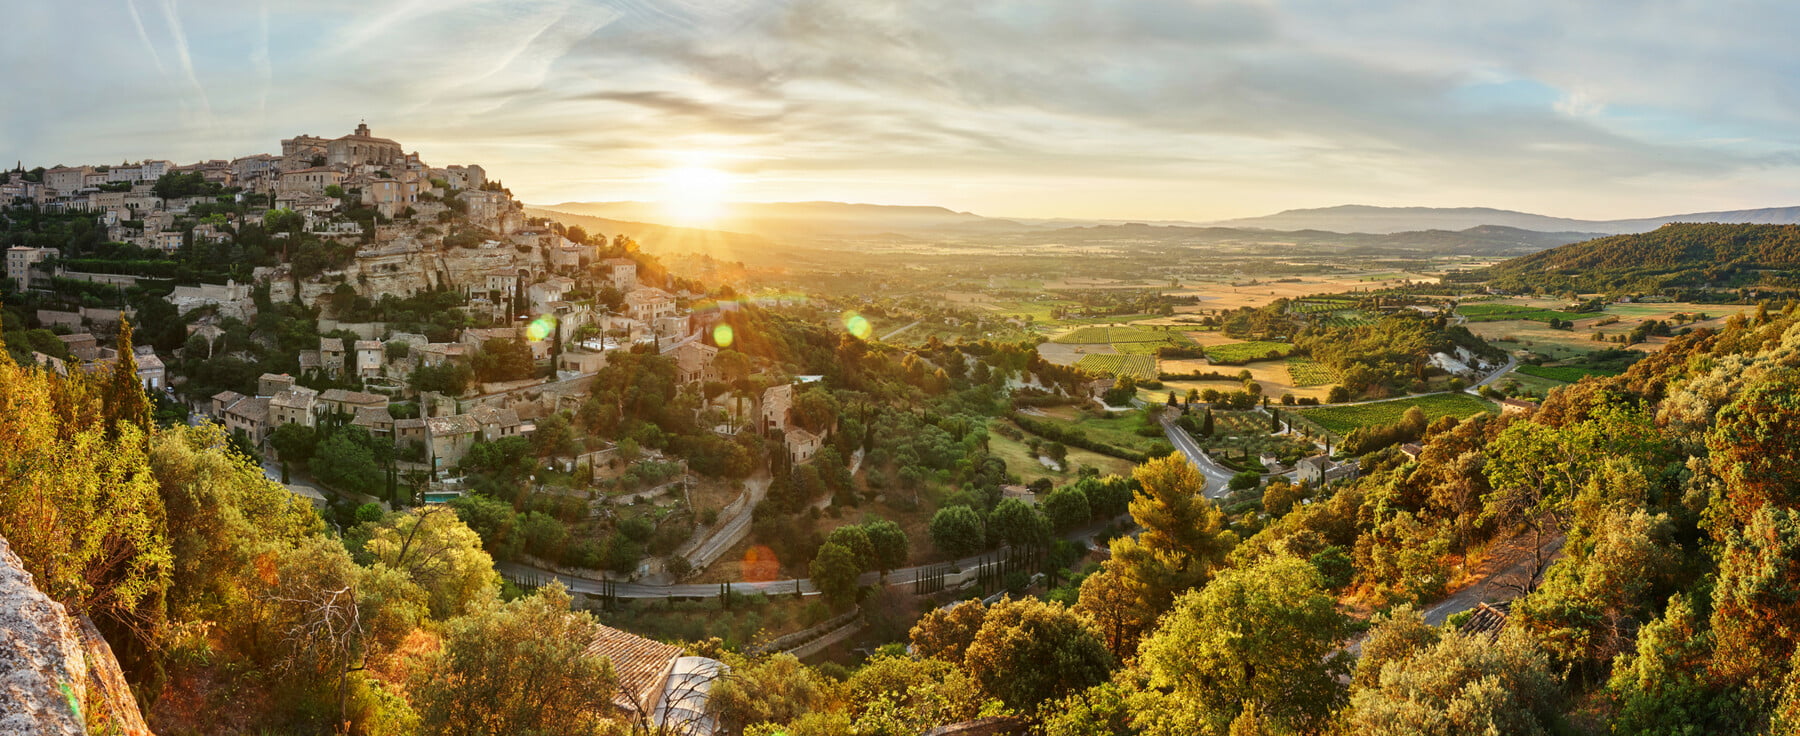 Triangle d'Or du Luberon • gordes pano scaled